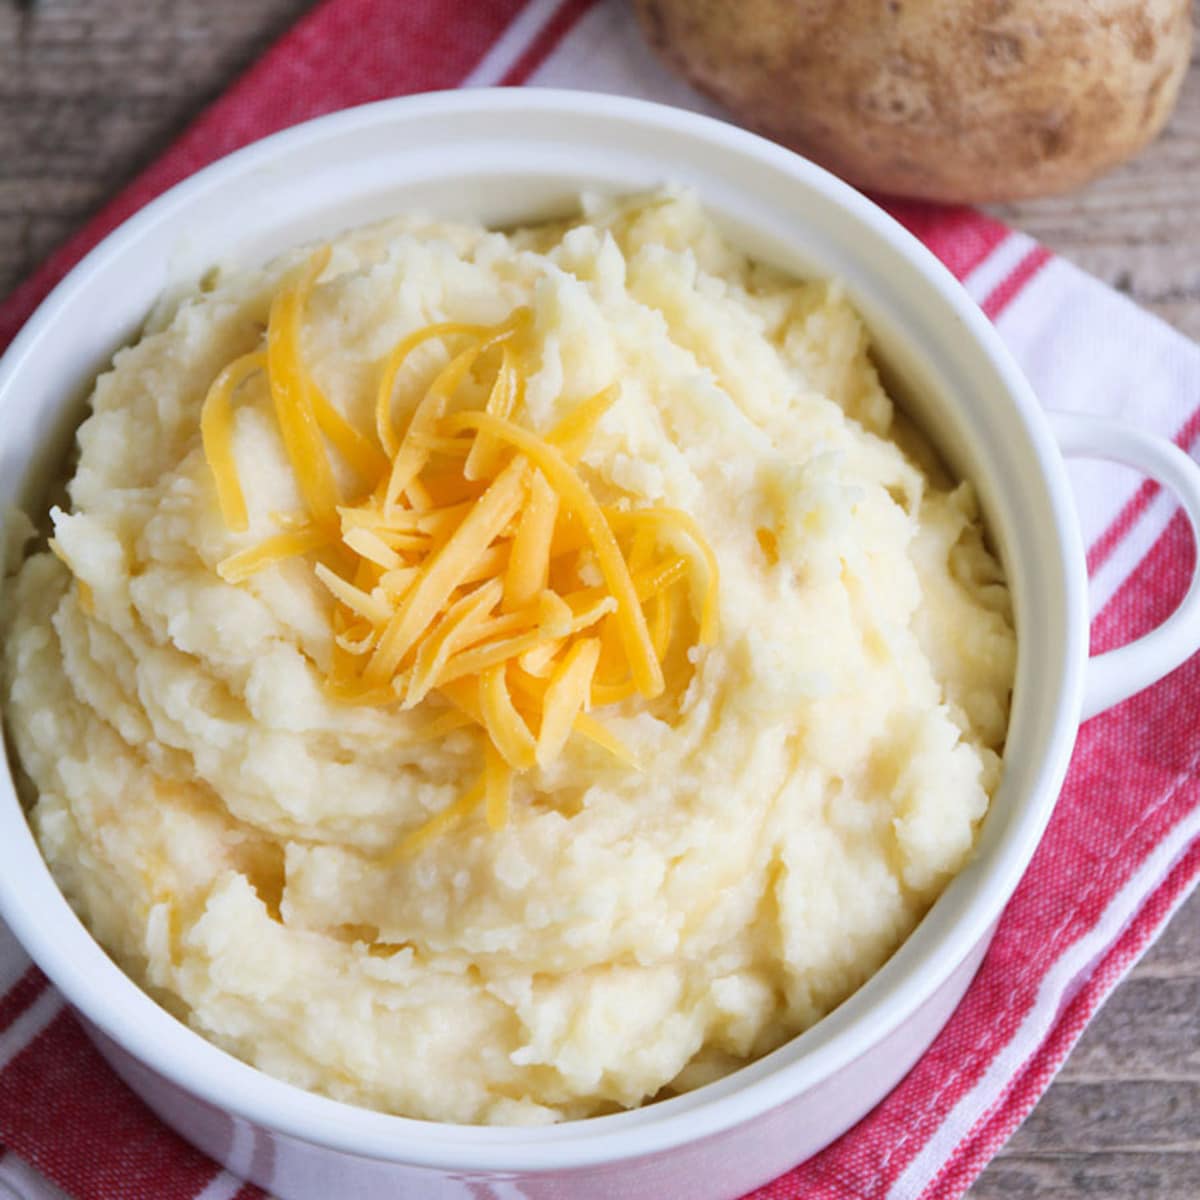 Thanksgiving side dishes - slow cooker mashed potatoes topped with cheese.